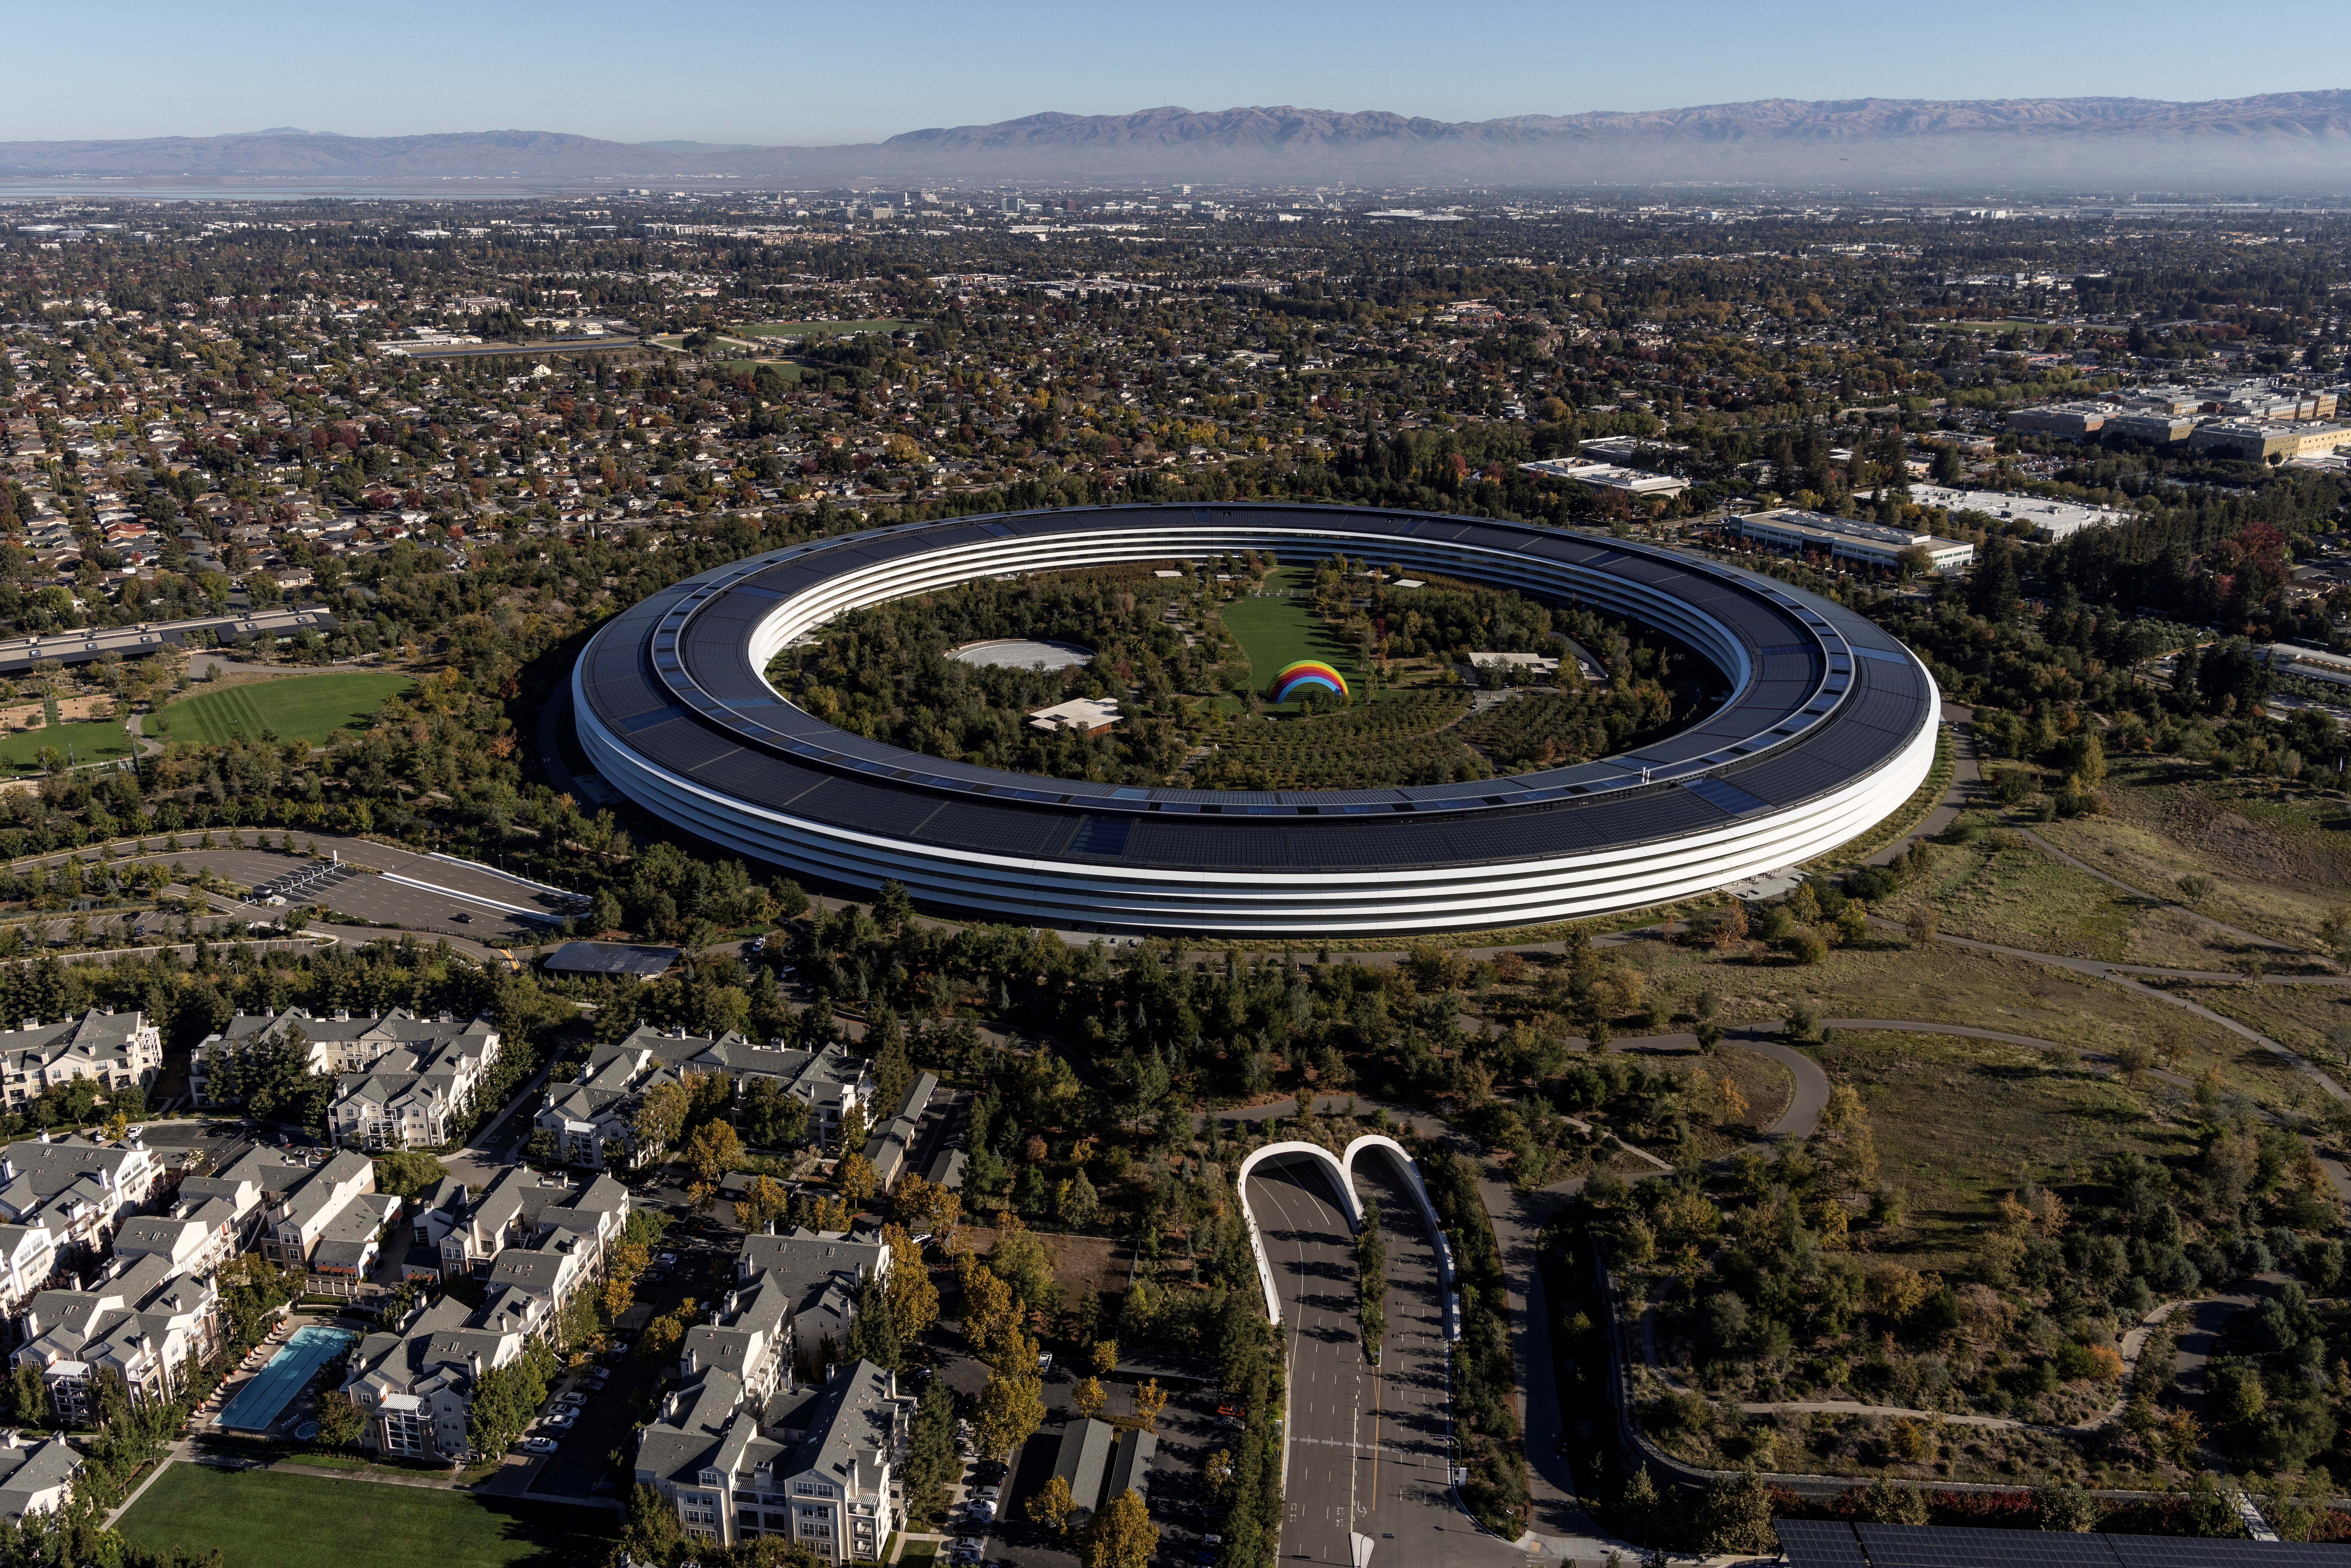 Aerial view of Apple's headquarters in Cupertino, California